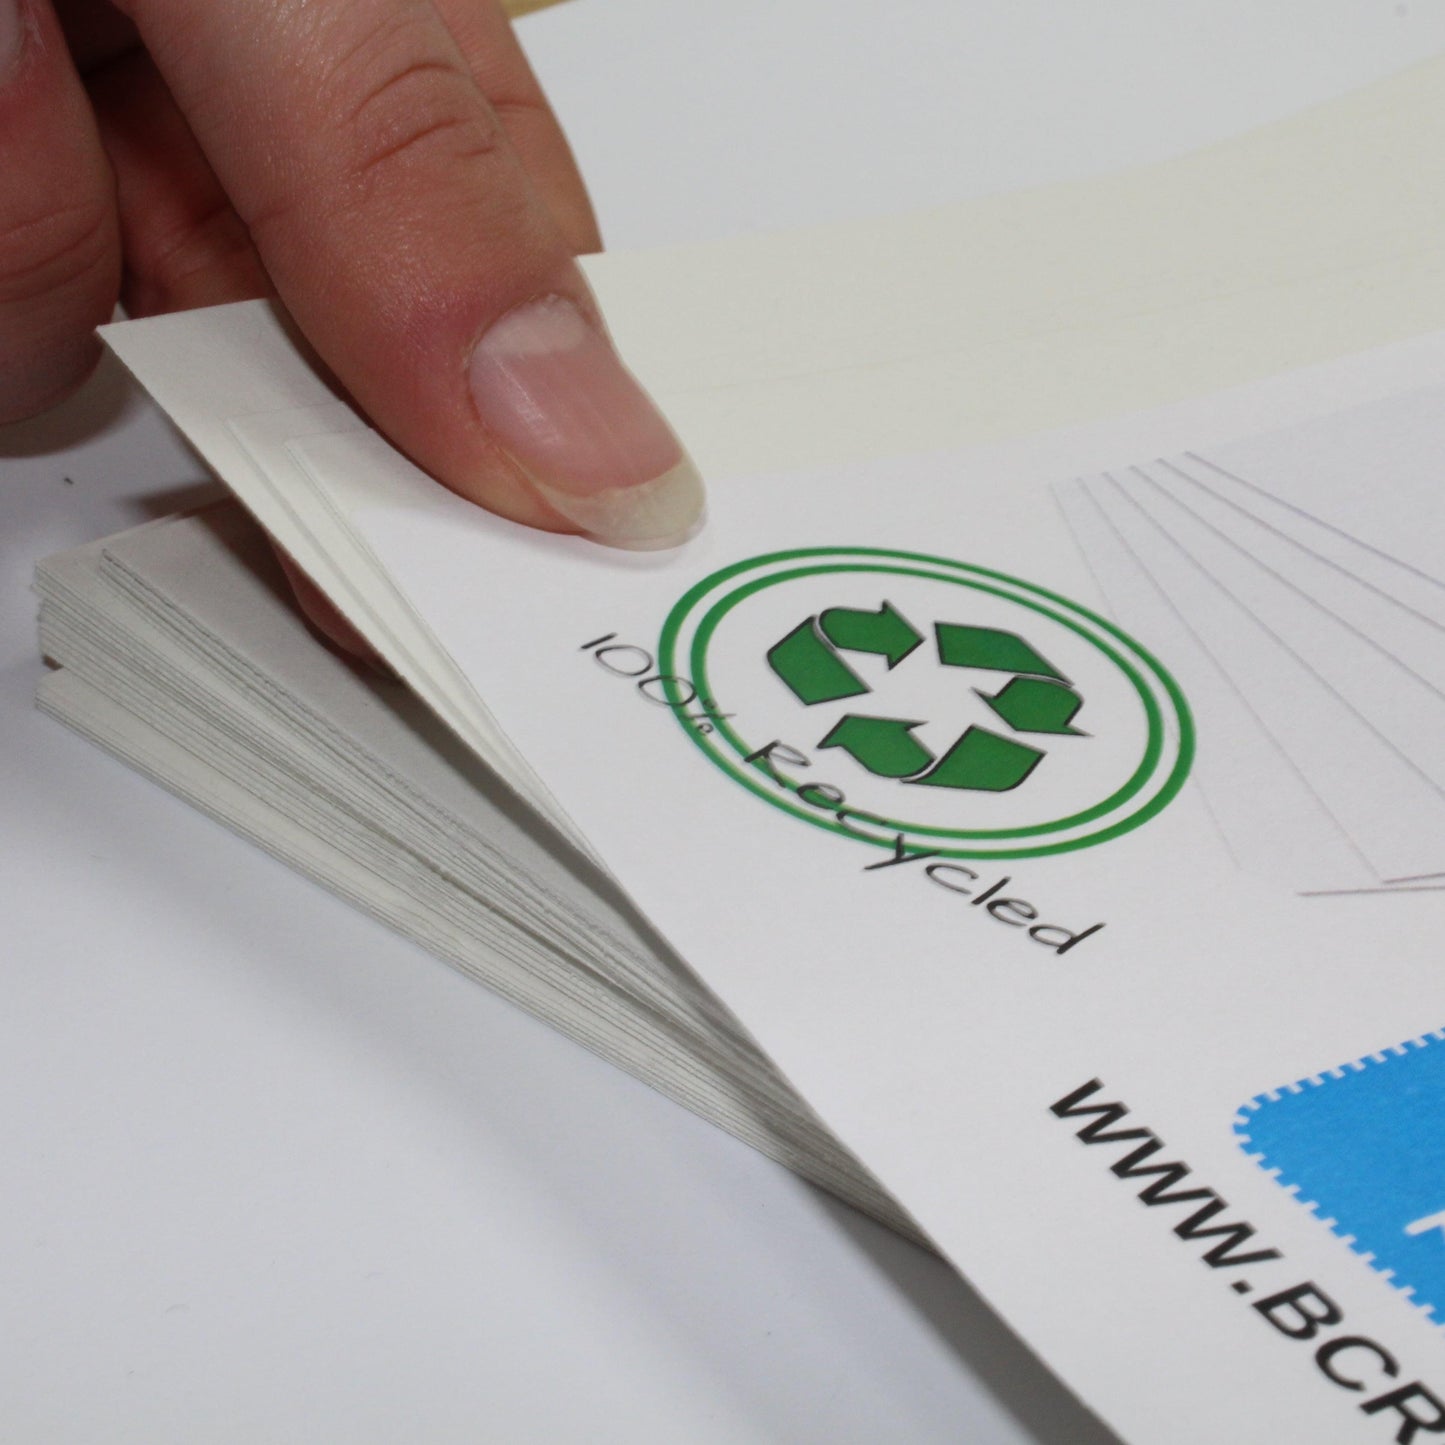 100% Recycled A3 White Card 180gsm Choose Quantity